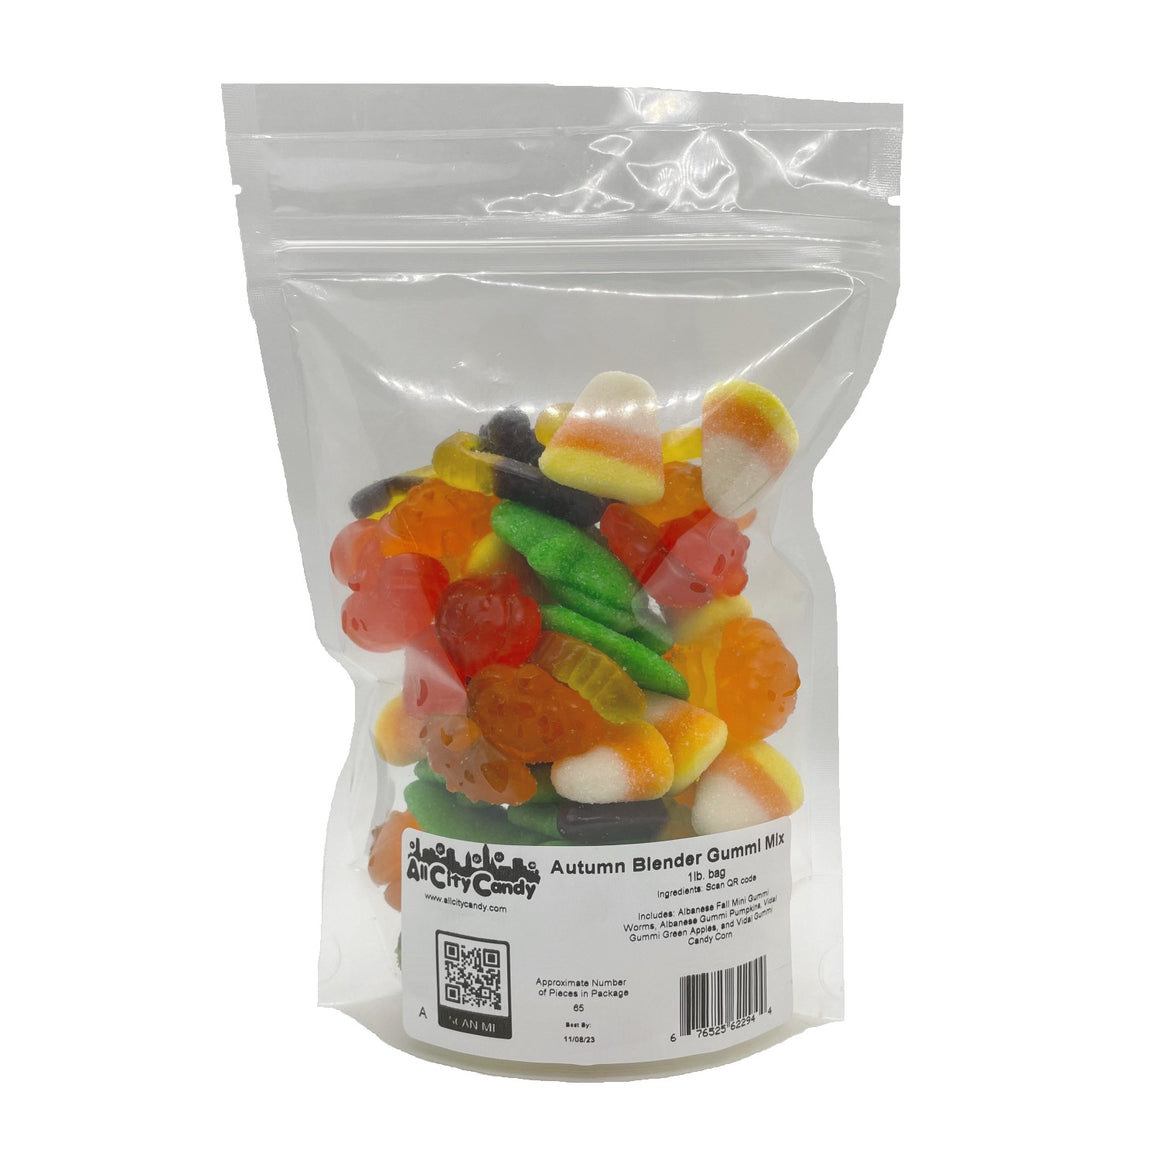 All City Candy Autumn Blender Gummi Mix 1 lb. Bulk Bag Halloween All City Candy For fresh candy and great service, visit www.allcitycandy.com